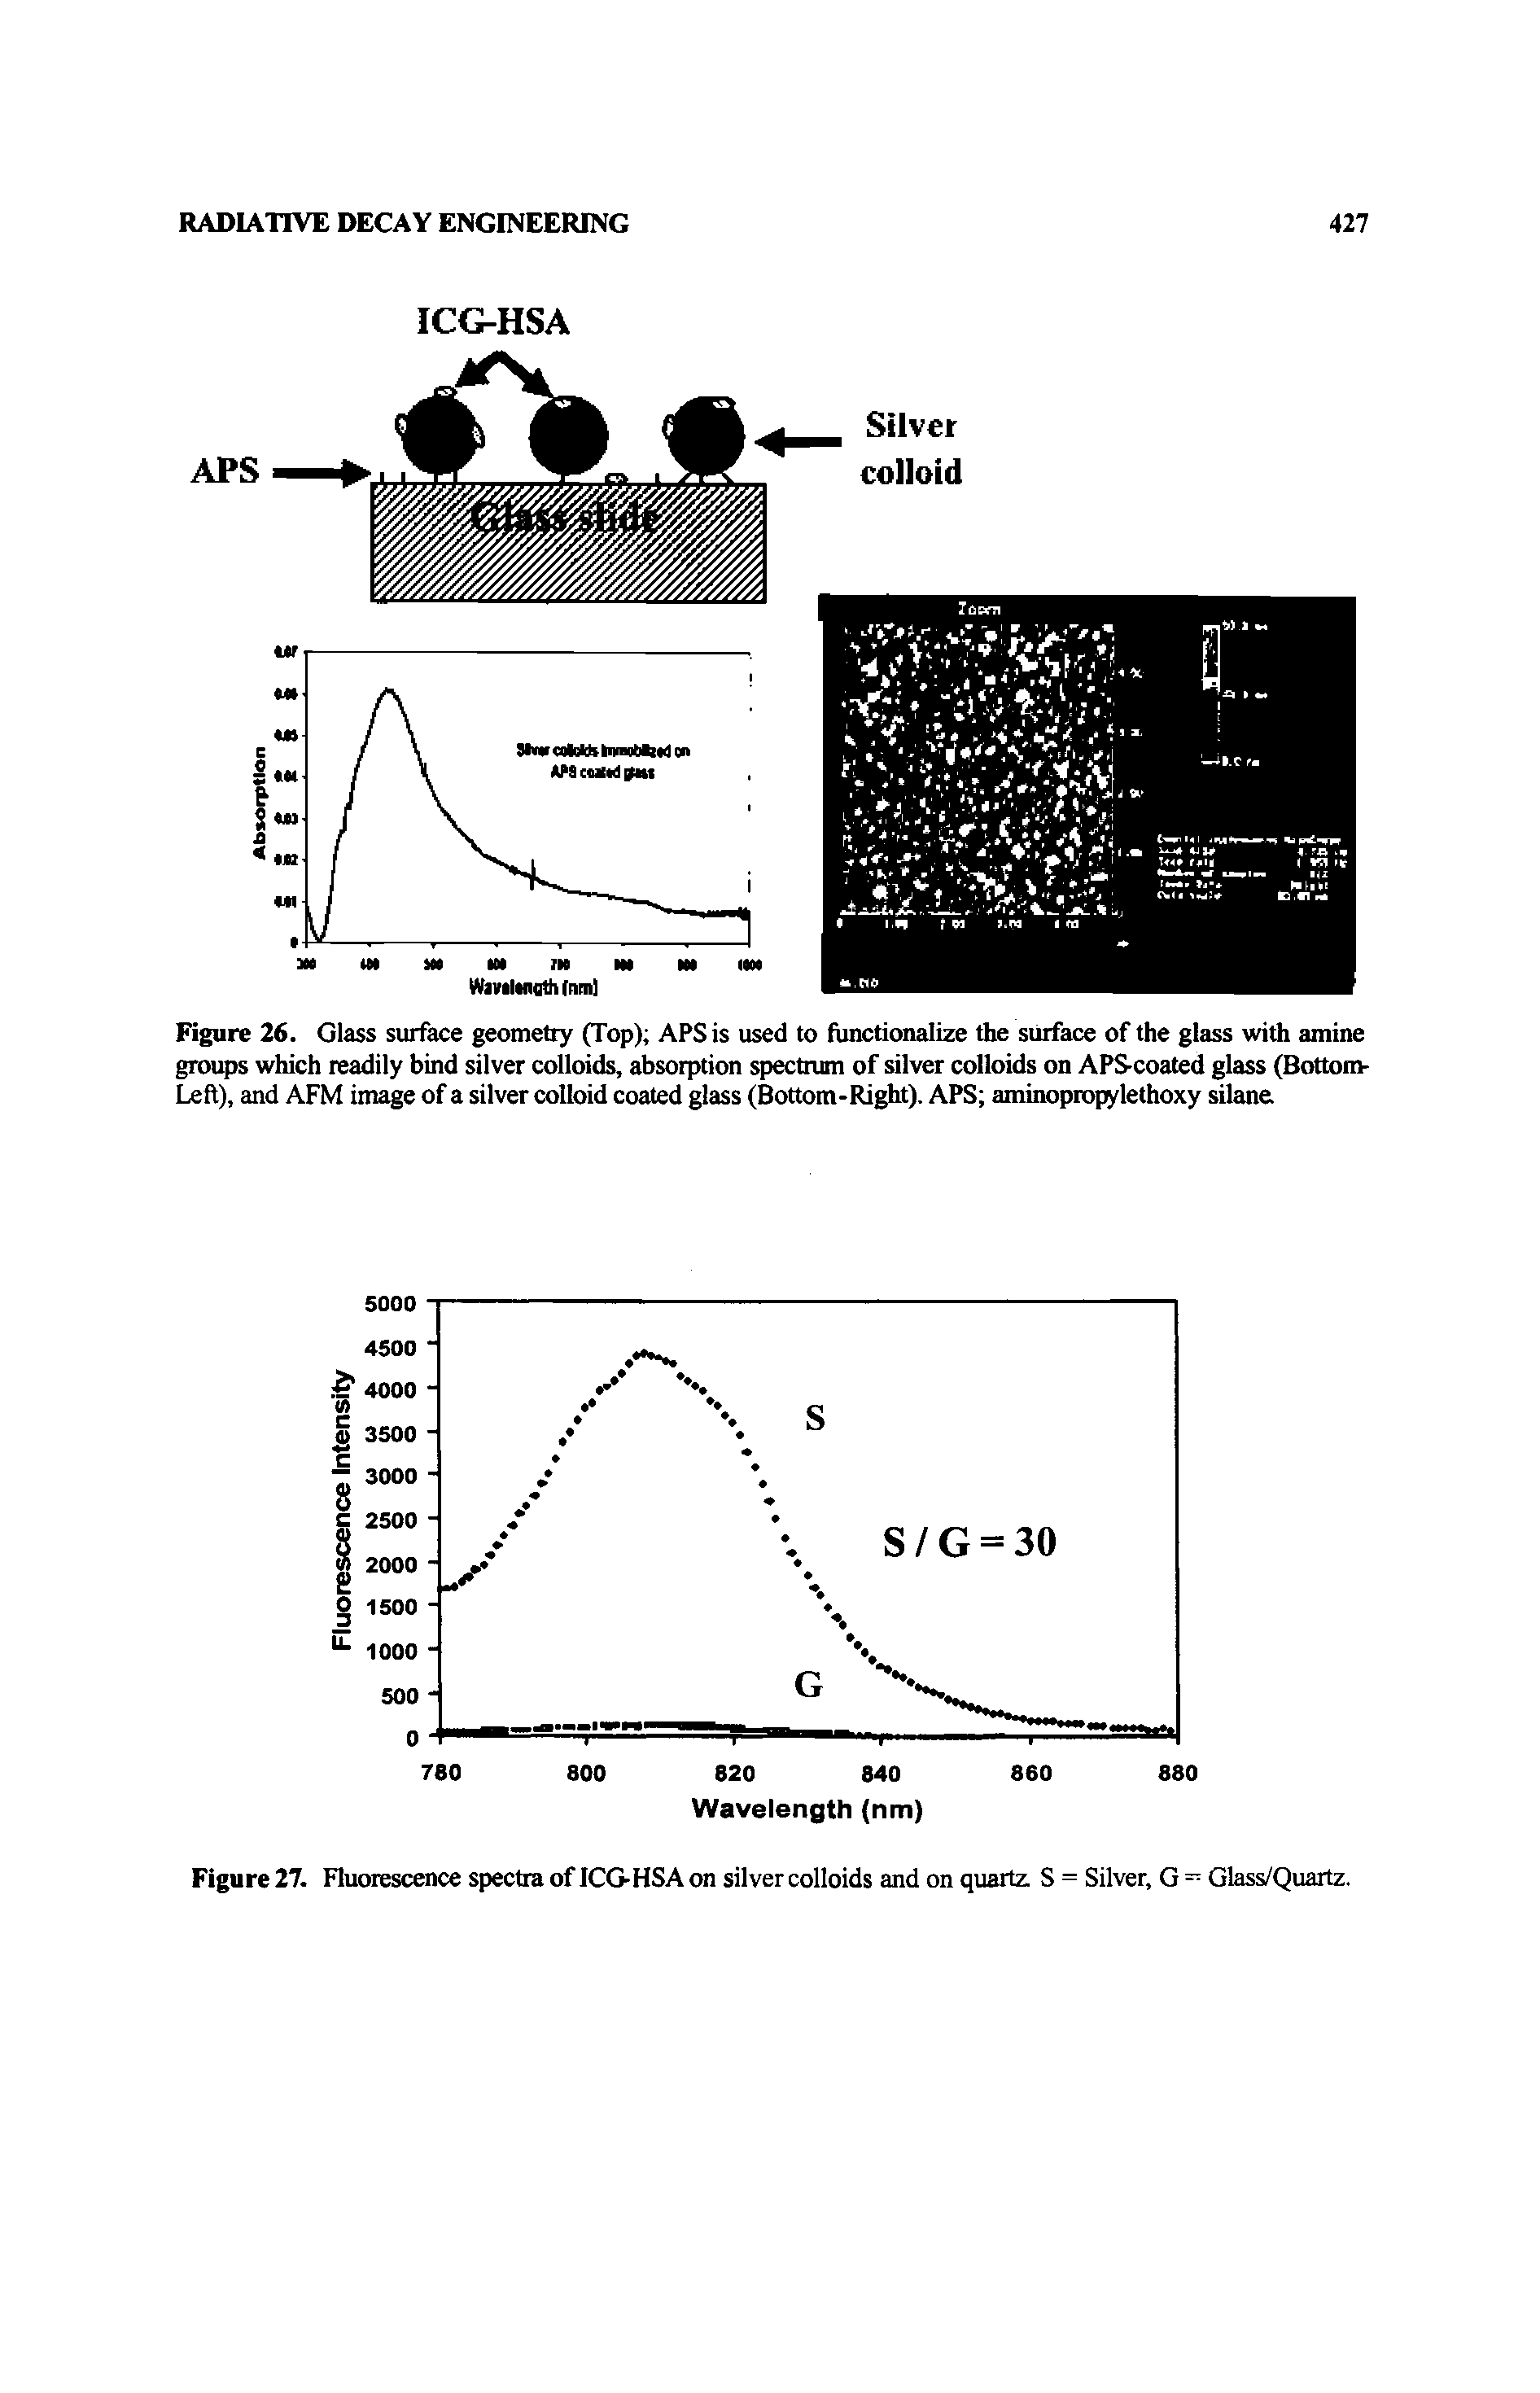 Figure 26. Glass surface geometry (Top) APS is used to functionalize the surface of the glass with amine groups which readily bind silver colloids, absorption spectrum of silver colloids on APScoated glass (Bottom-Left), and AFM image of a silver colloid coated glass (Bottom-Right). APS aminopropylethoxy silane...